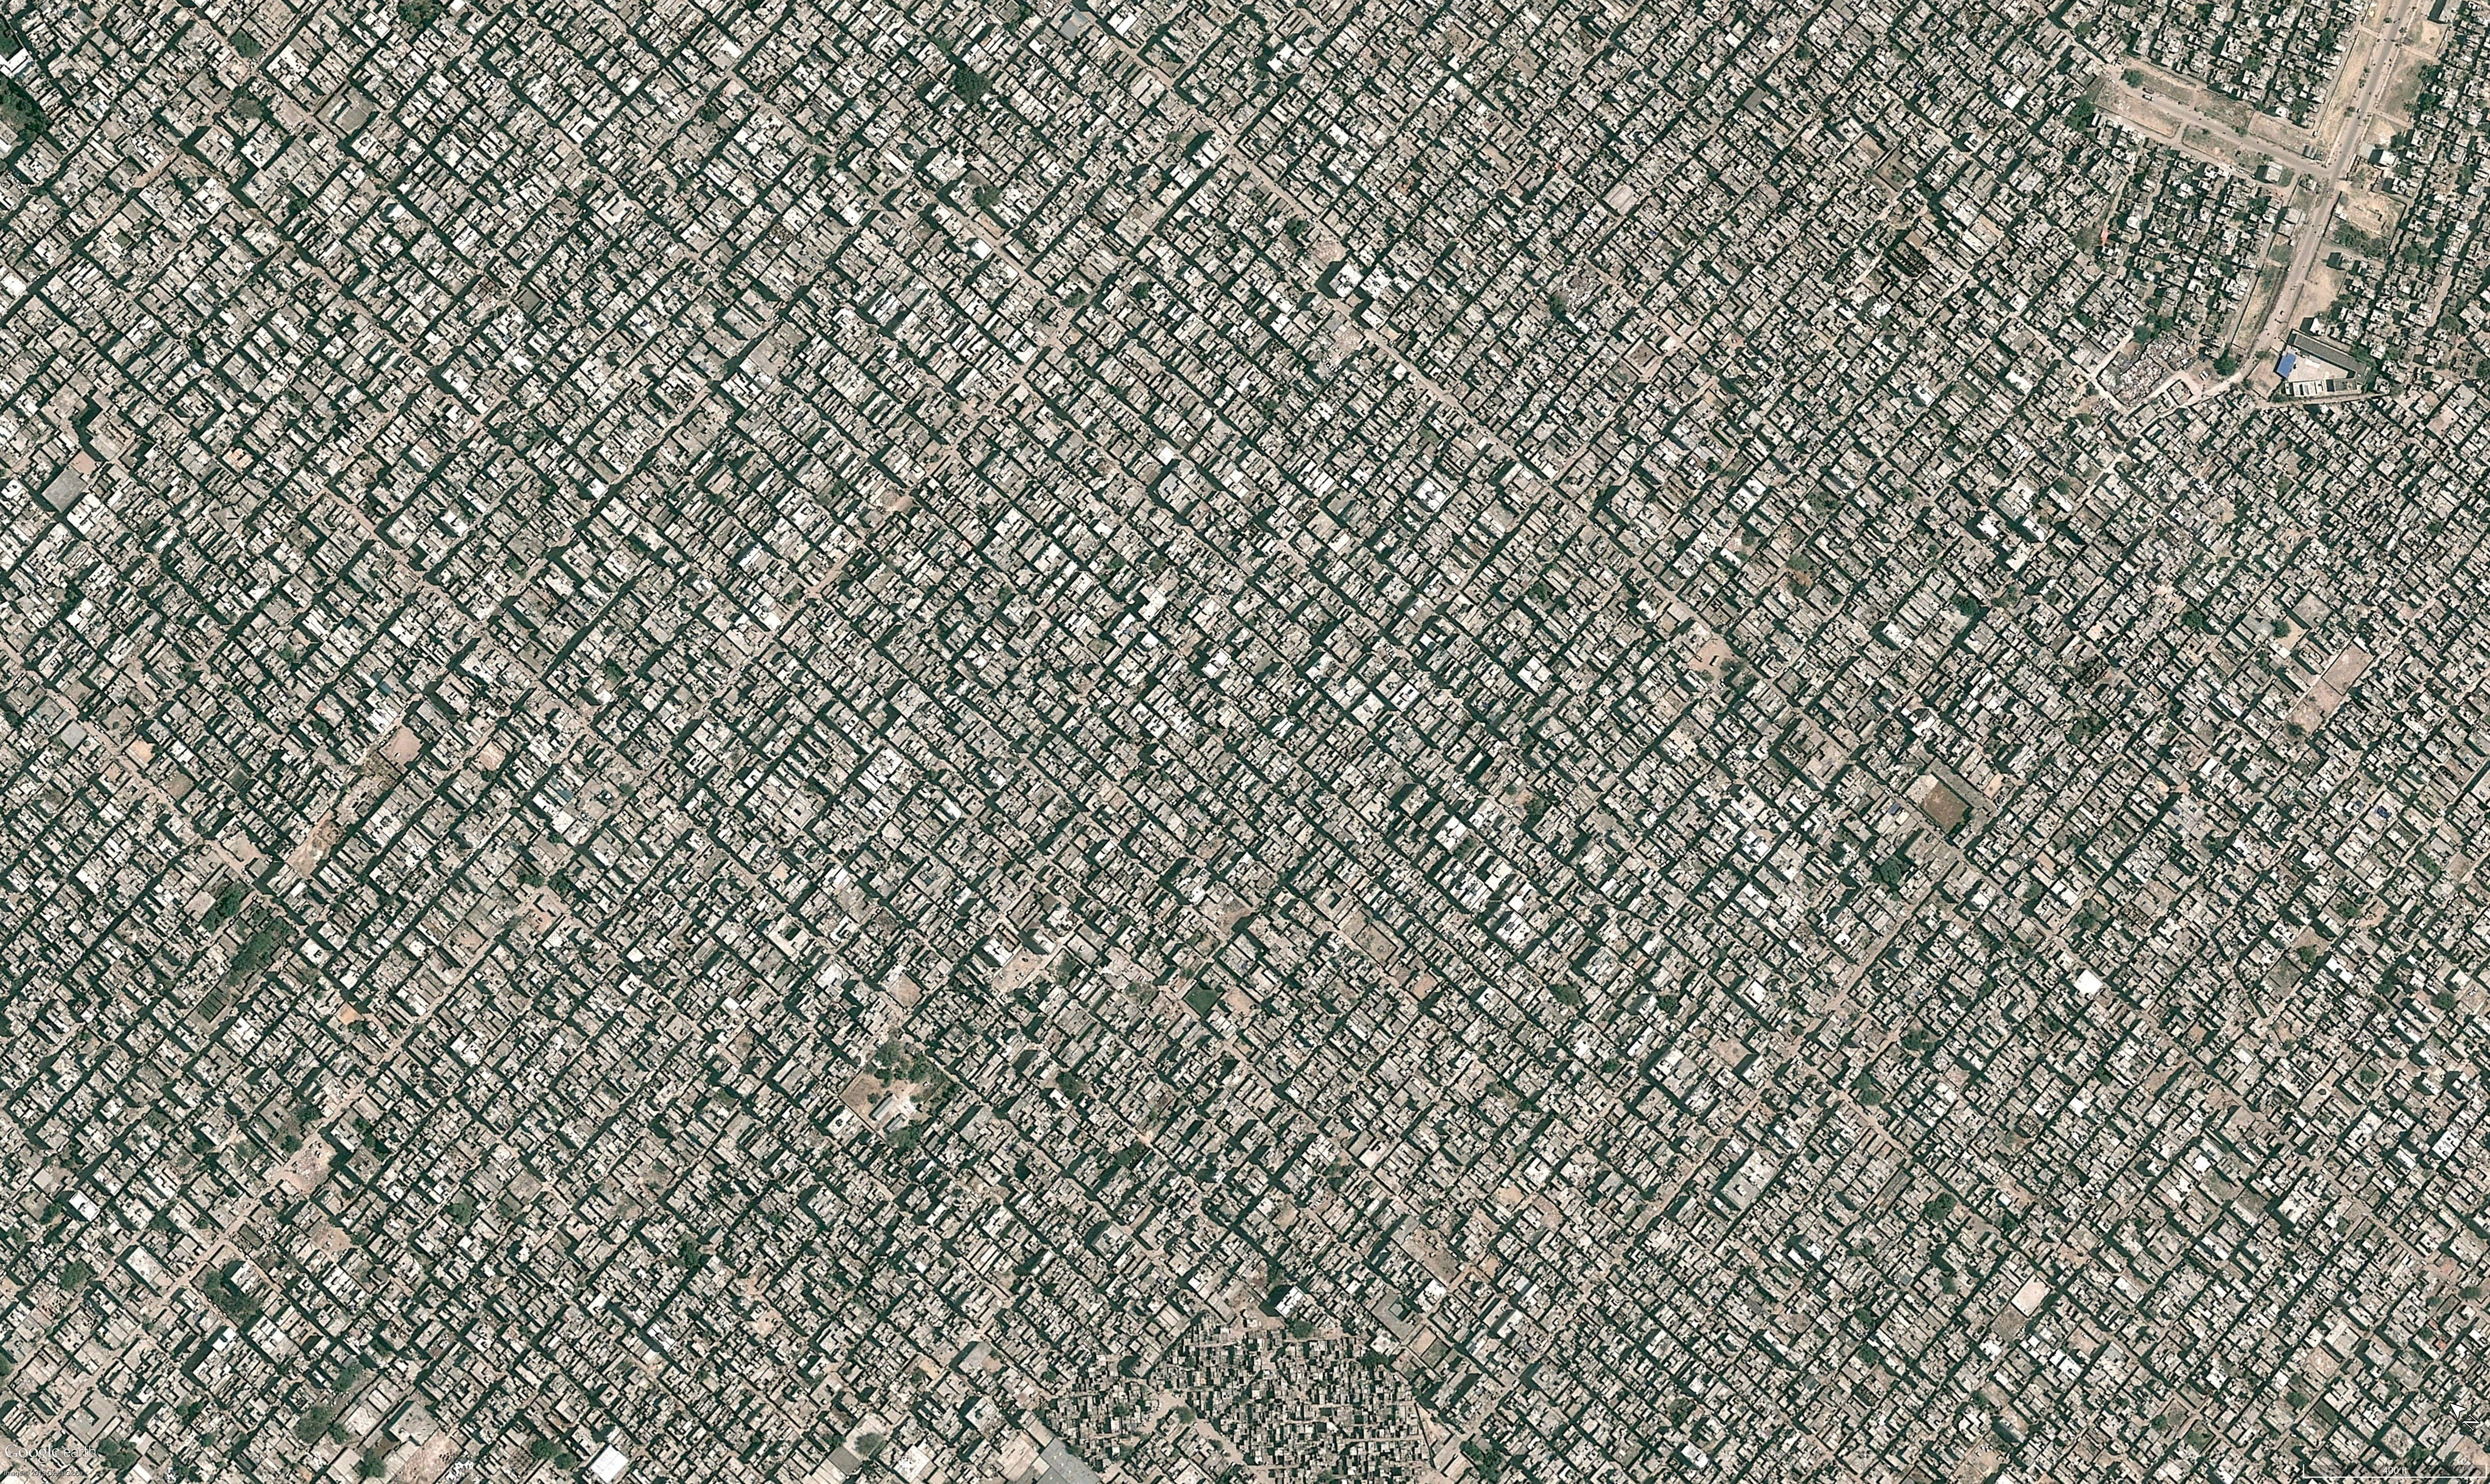 Aerial photography of New Delhi